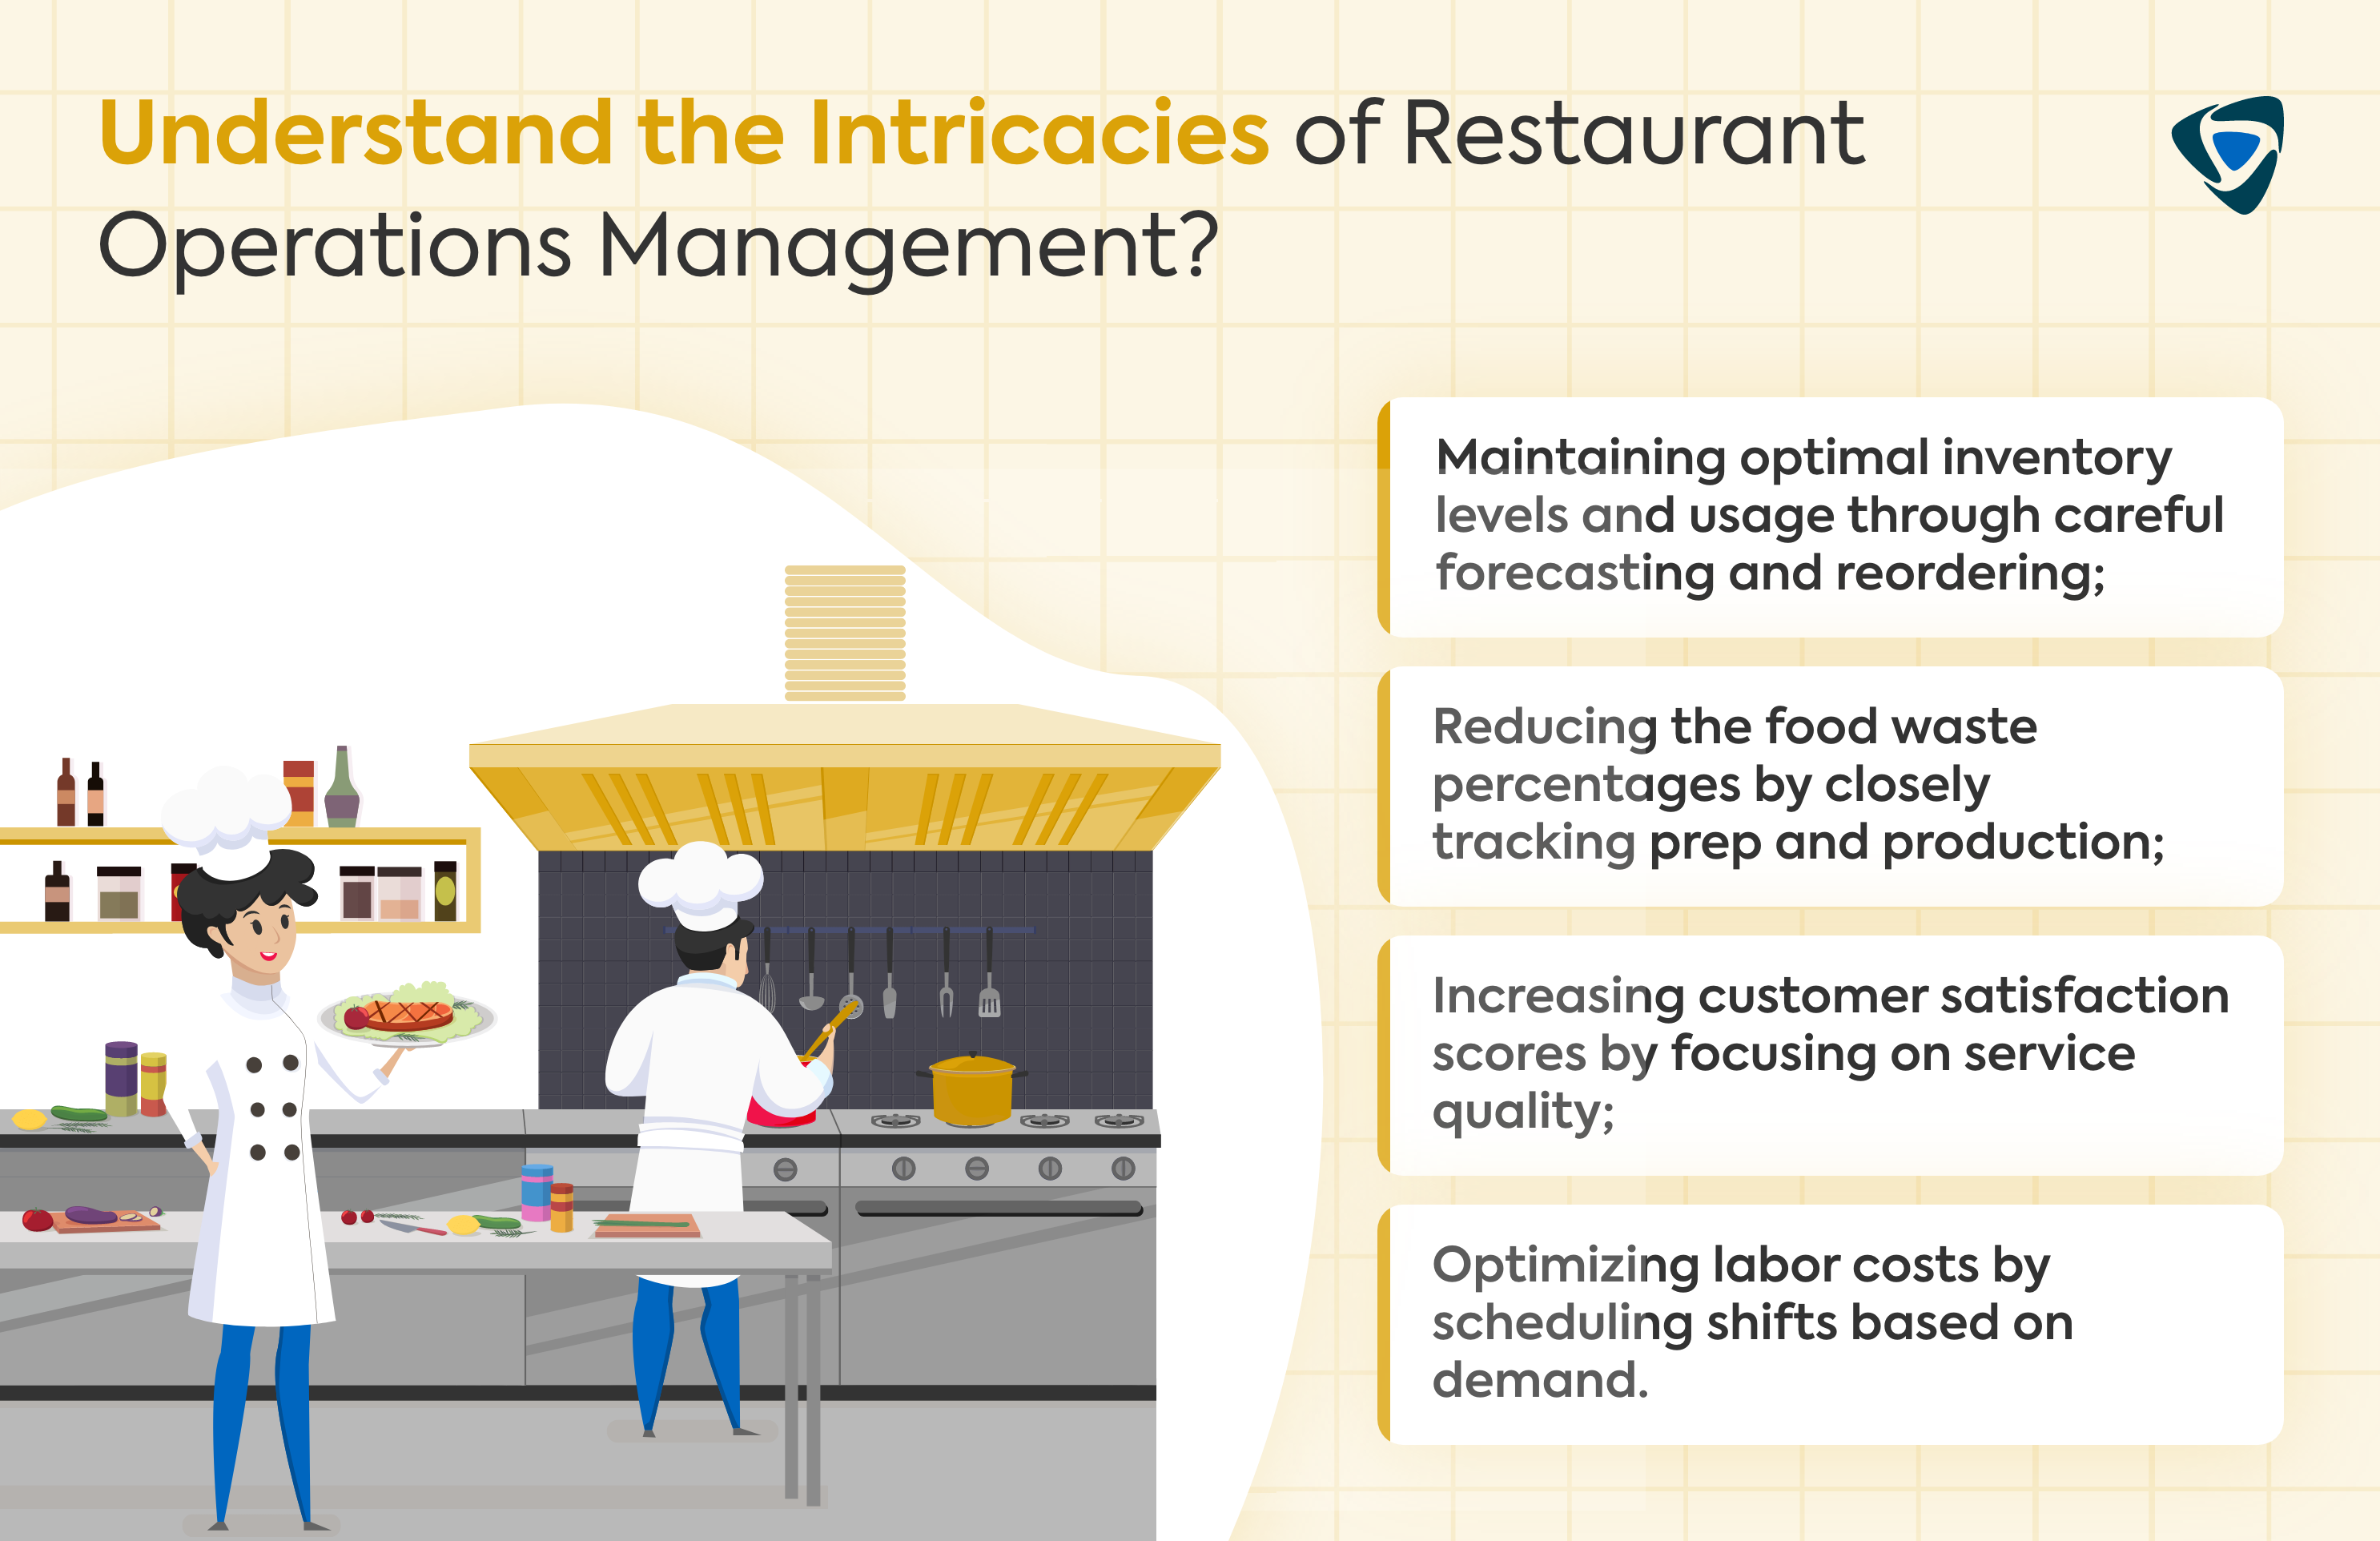 Understand the Intricacies of Restaurant Operations Management?